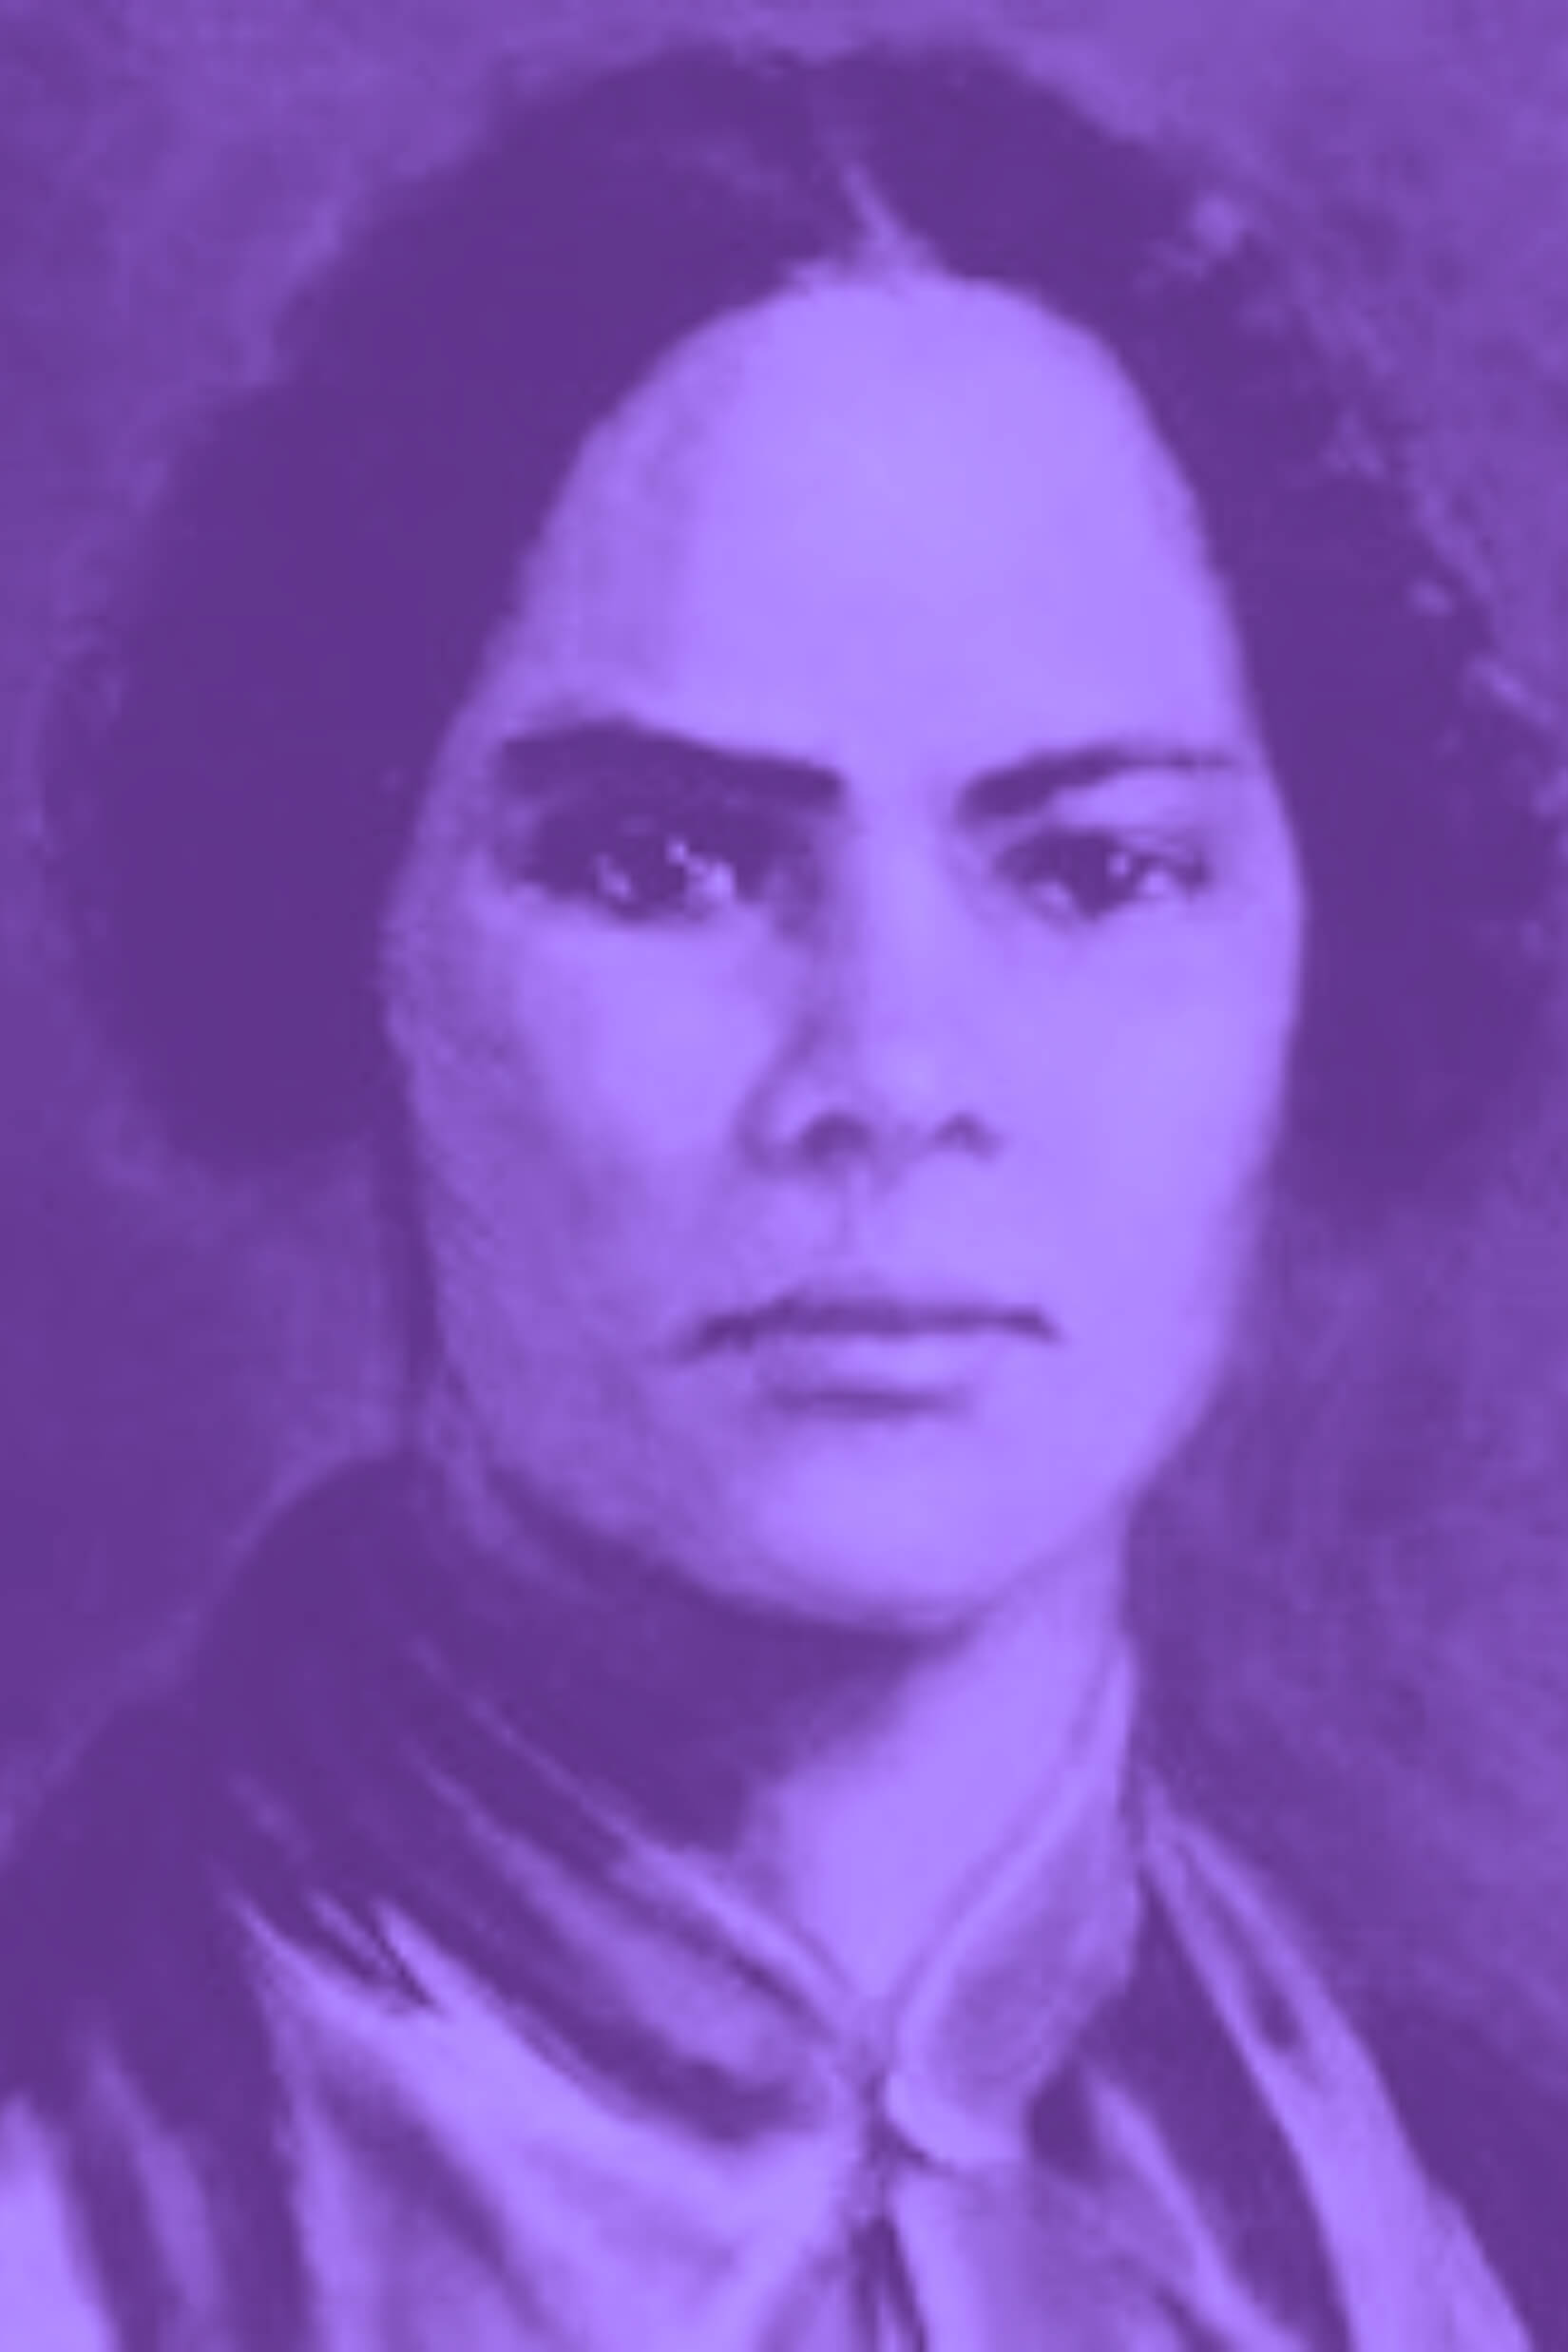 Mary Ann Shadd Cary, courtesy of the National Women's Hall of Fame